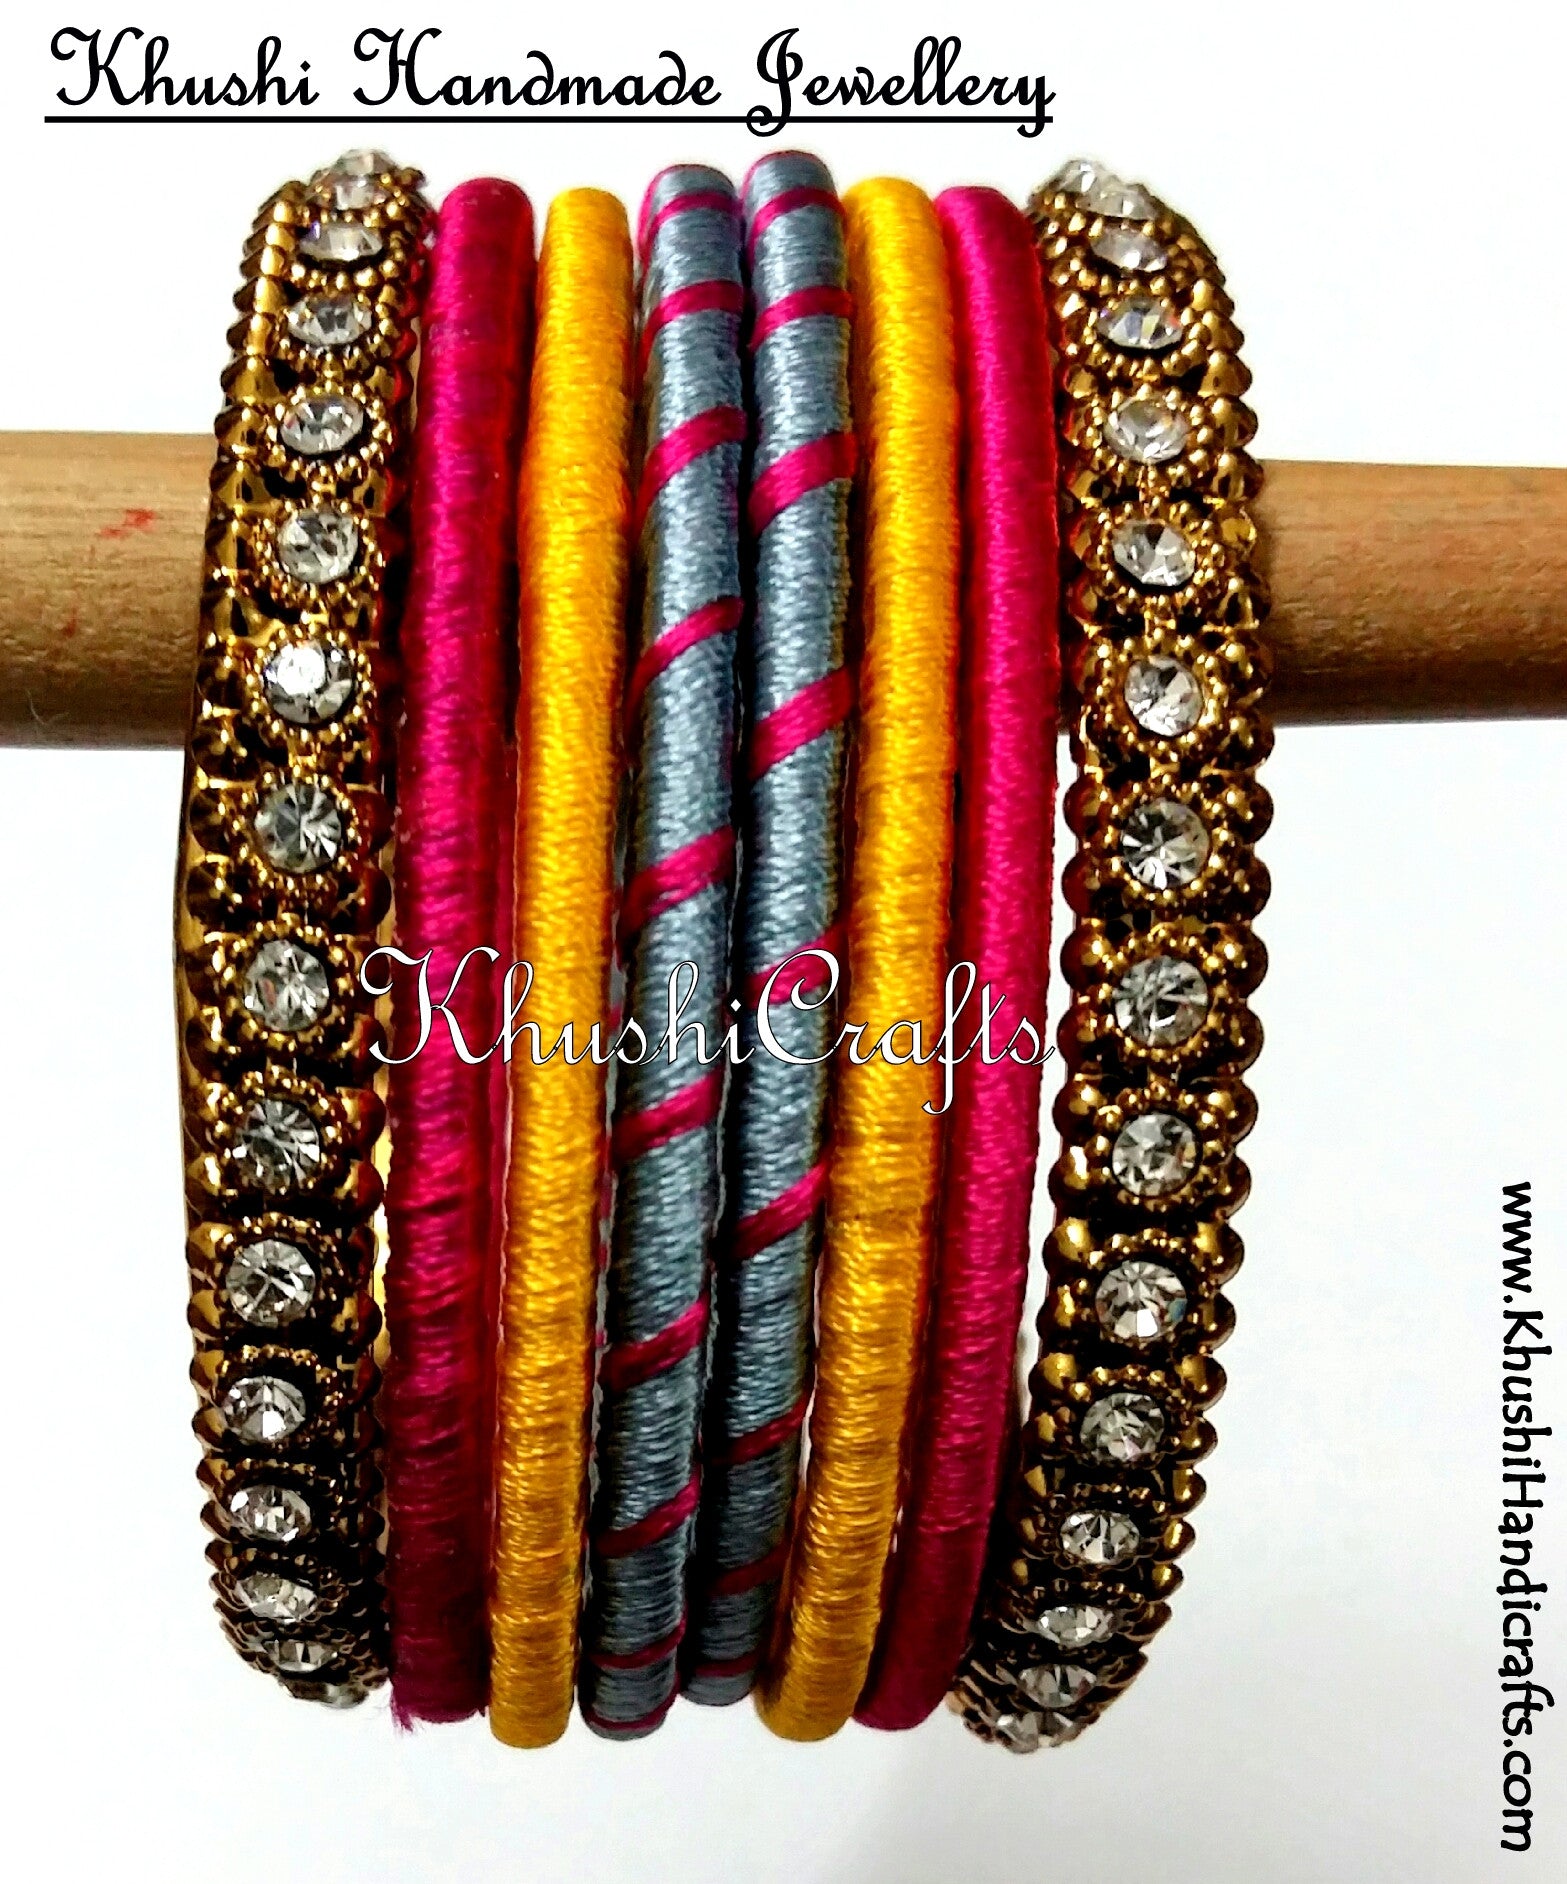 Trendy Hand-crafted Silk Bangles in Grey Yellow and Pink - Khushi Handmade Jewellery